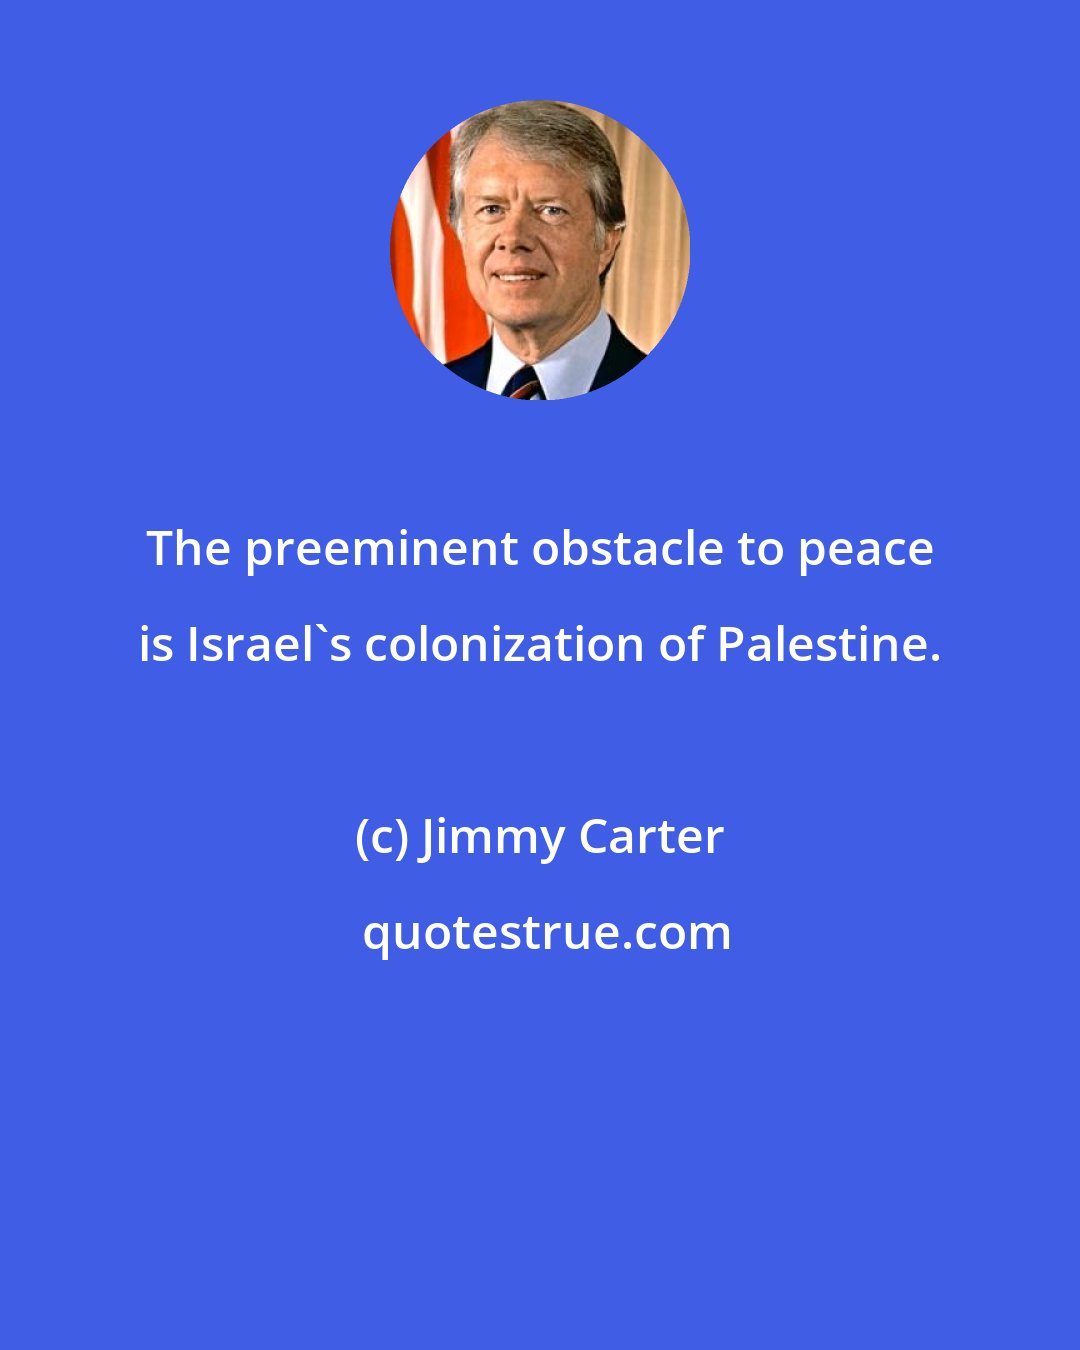 Jimmy Carter: The preeminent obstacle to peace is Israel's colonization of Palestine.